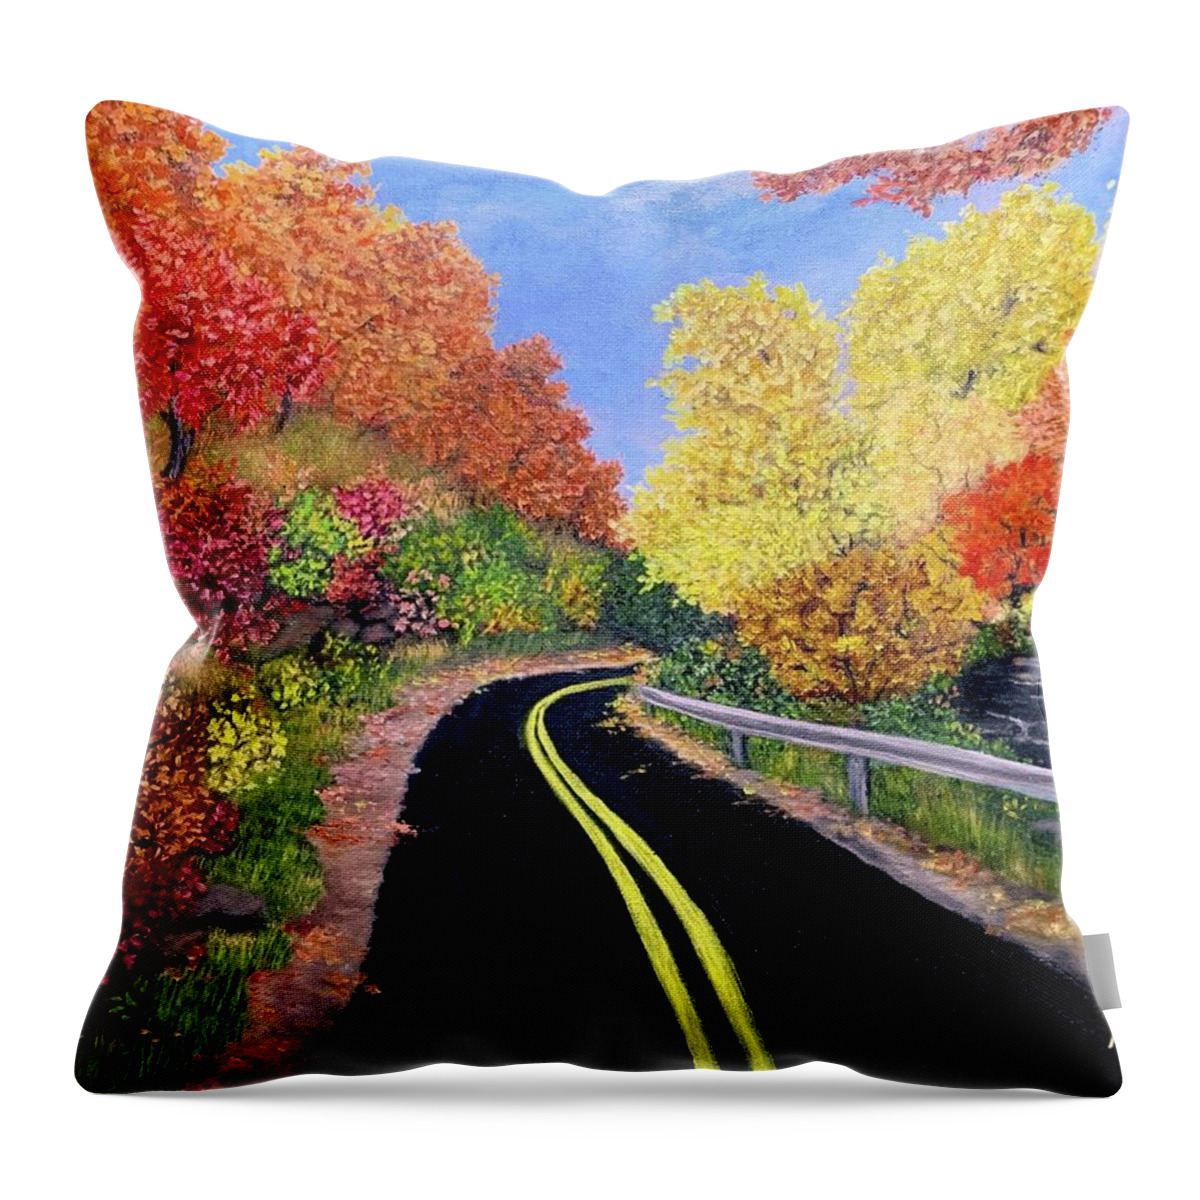  Throw Pillow featuring the painting Adirondack Country Road by Peggy Miller